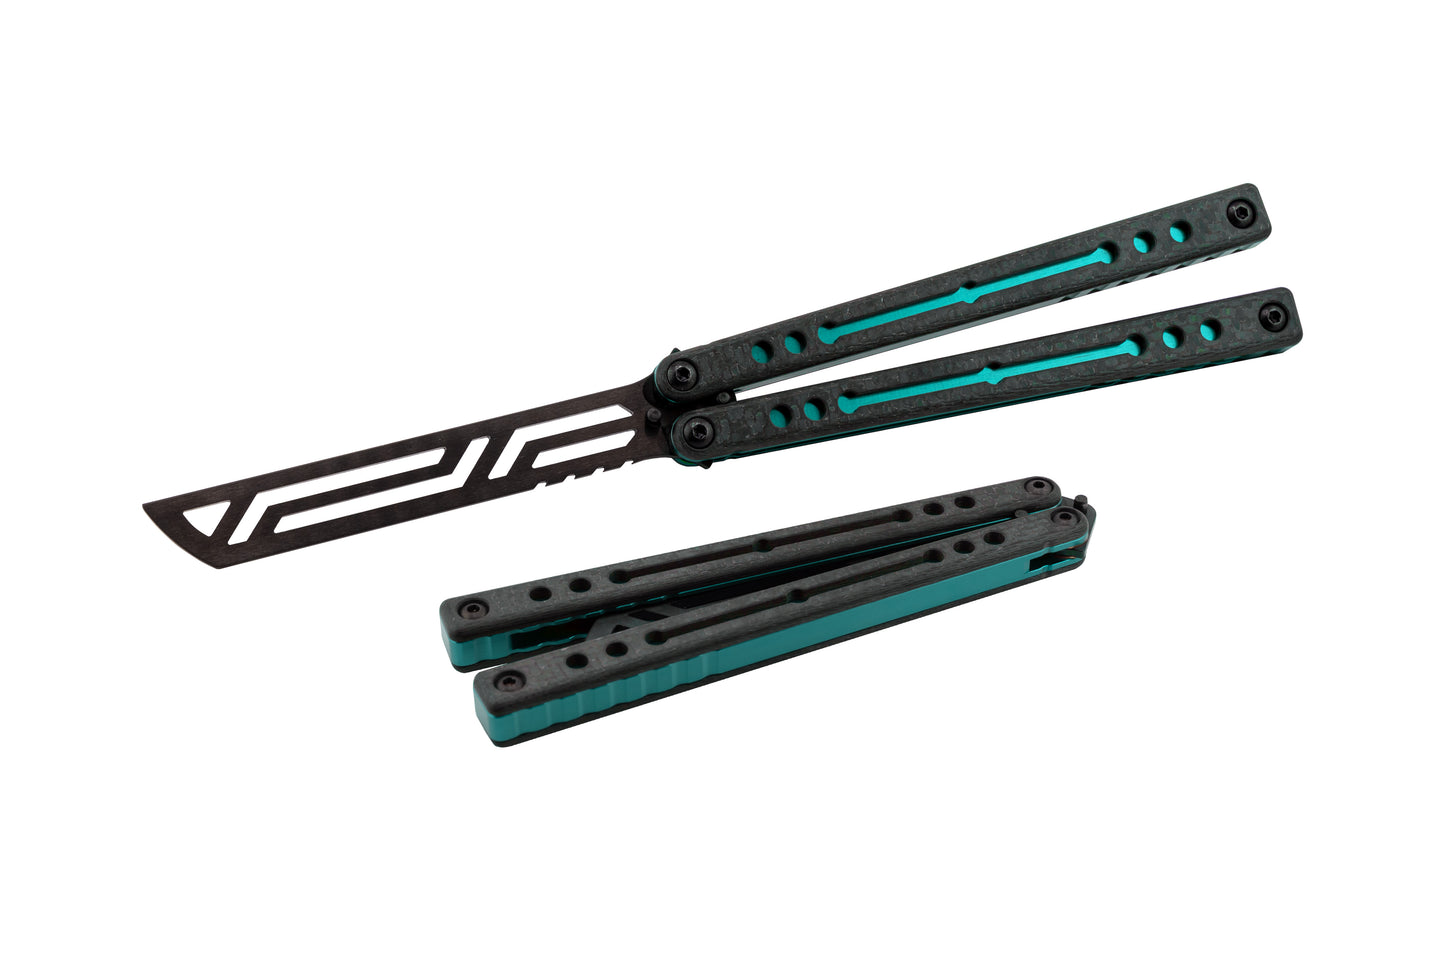 inked teal carbon fiber nautilus vs balisong butterfly knife trainer g10 scales open and closed